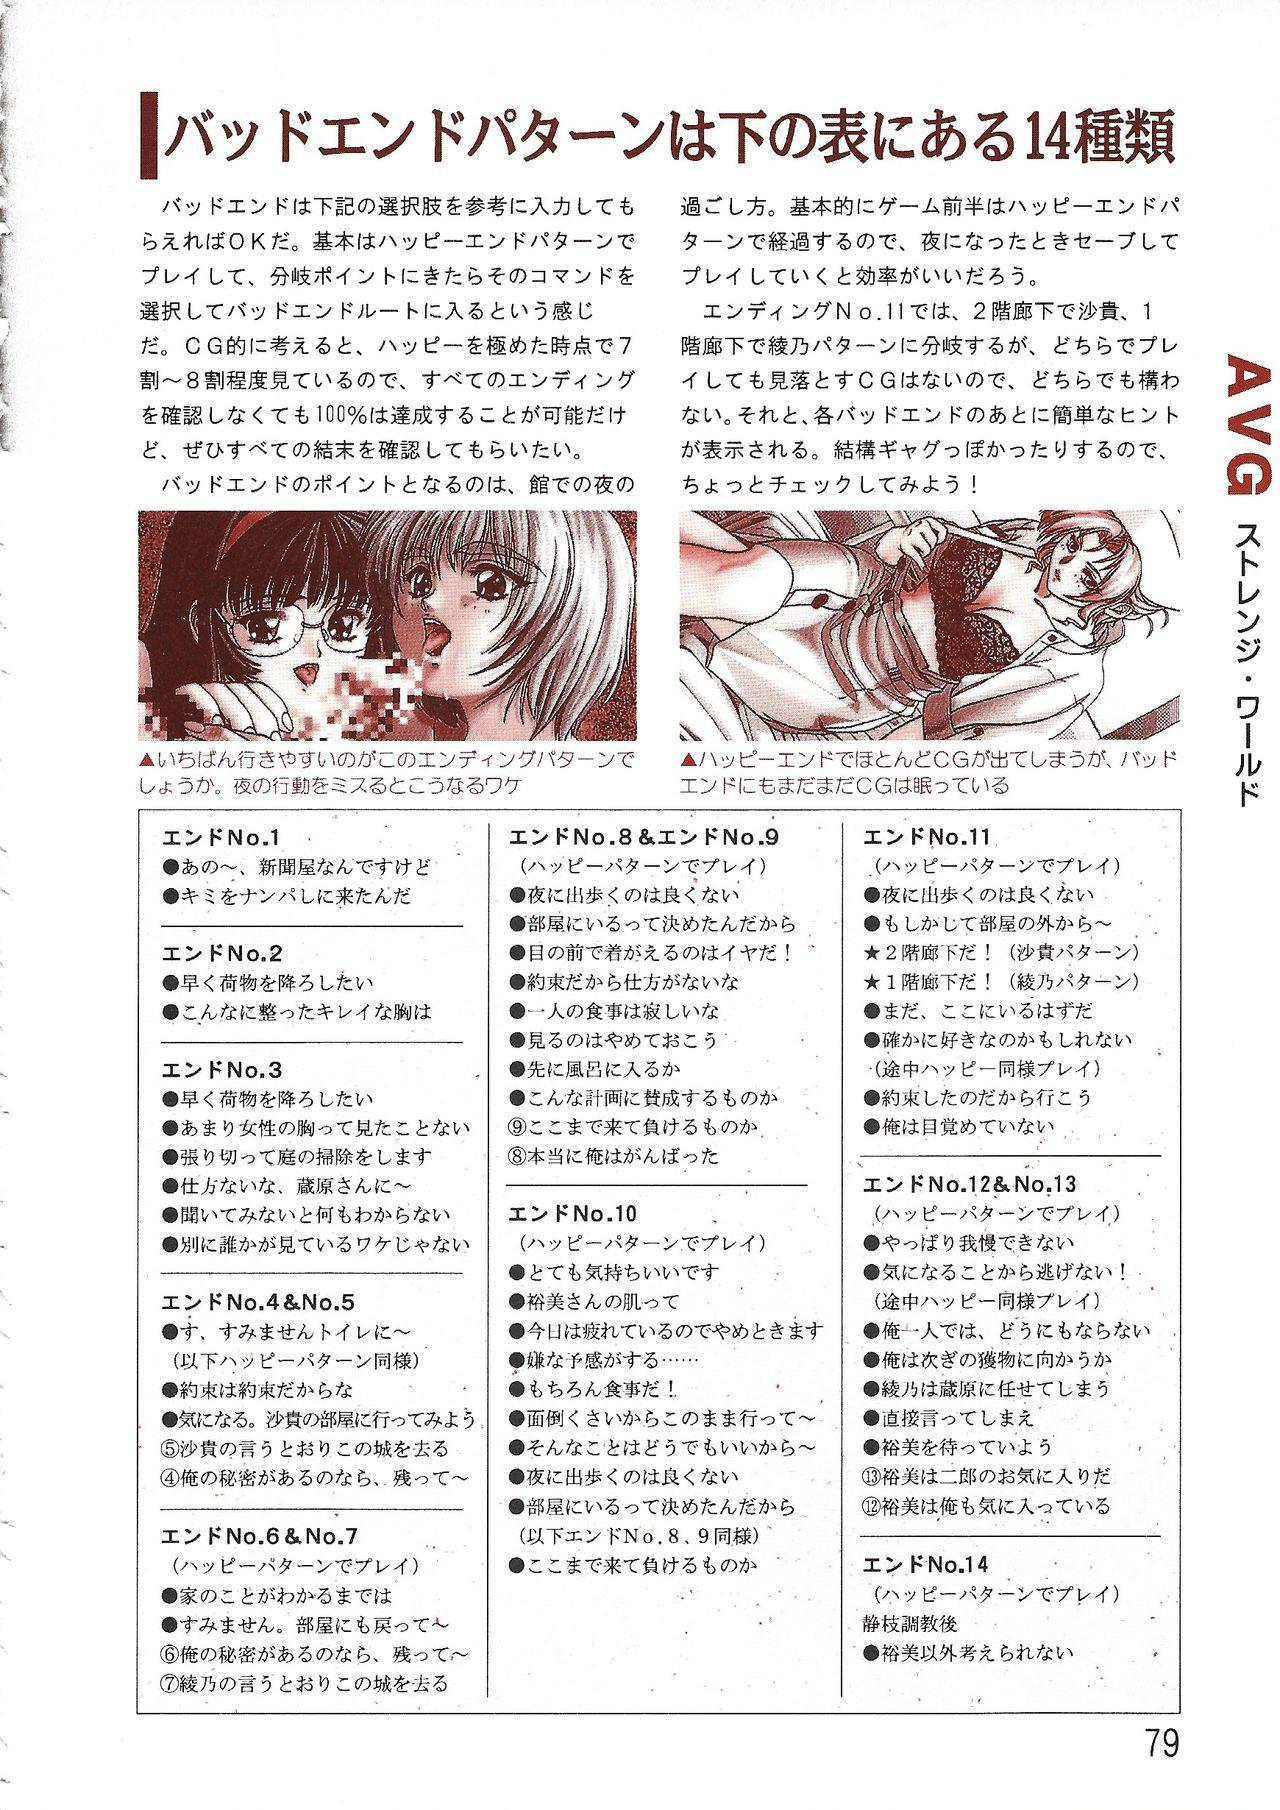 PC Bishoujo Software Strategy Book: Strategy King 2 78